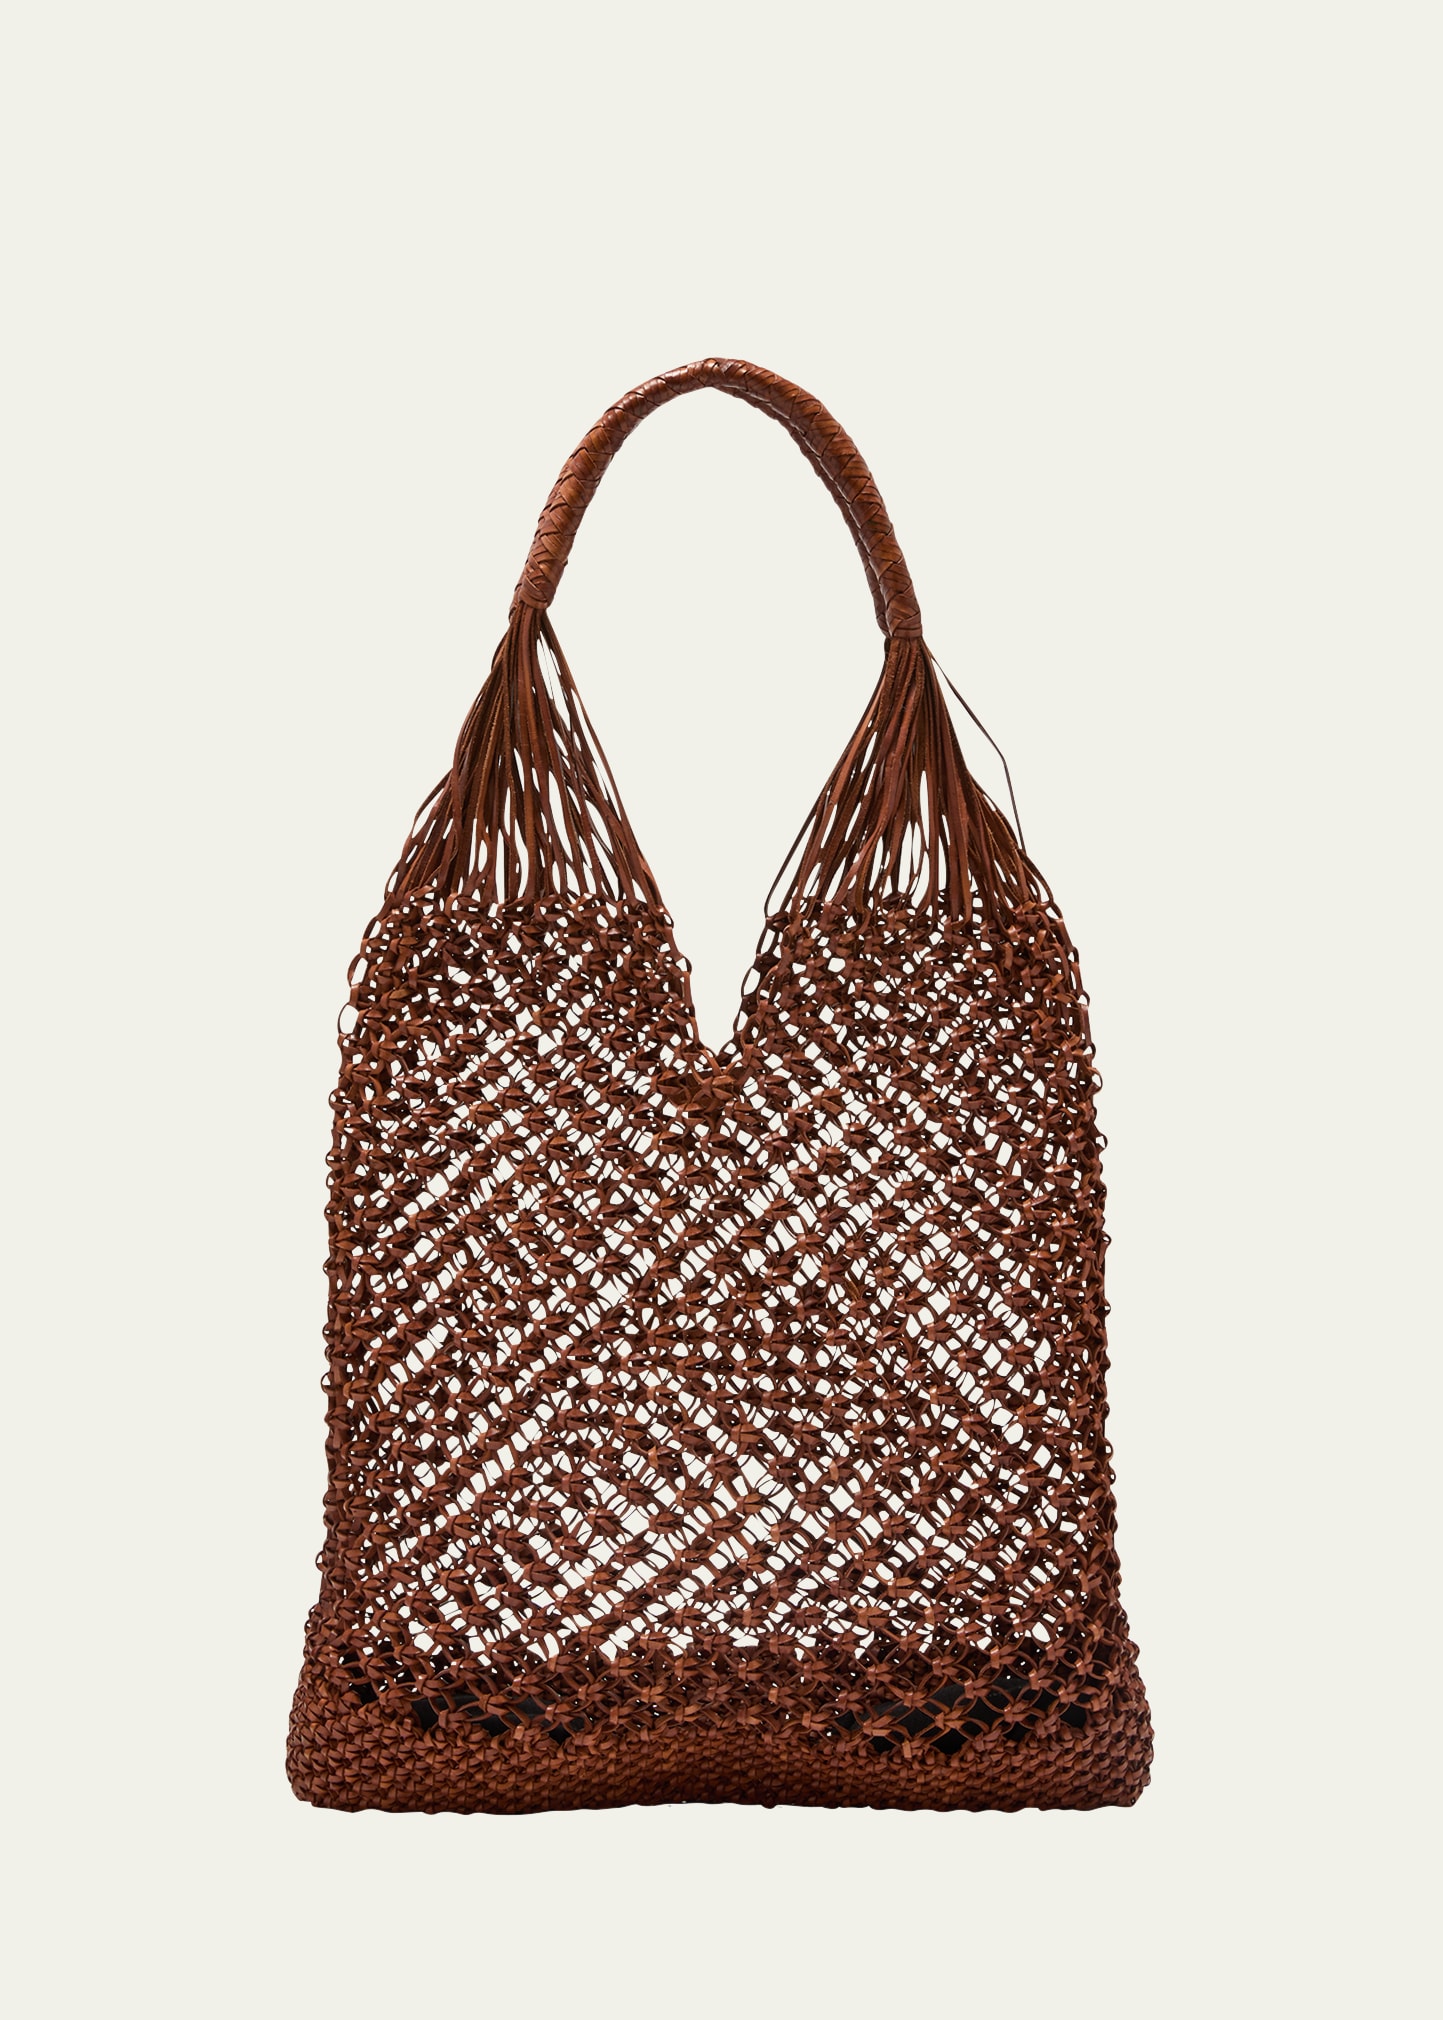 Ulla Johnson Tulia Large Knotted Leather Tote Bag In Pecan Brown